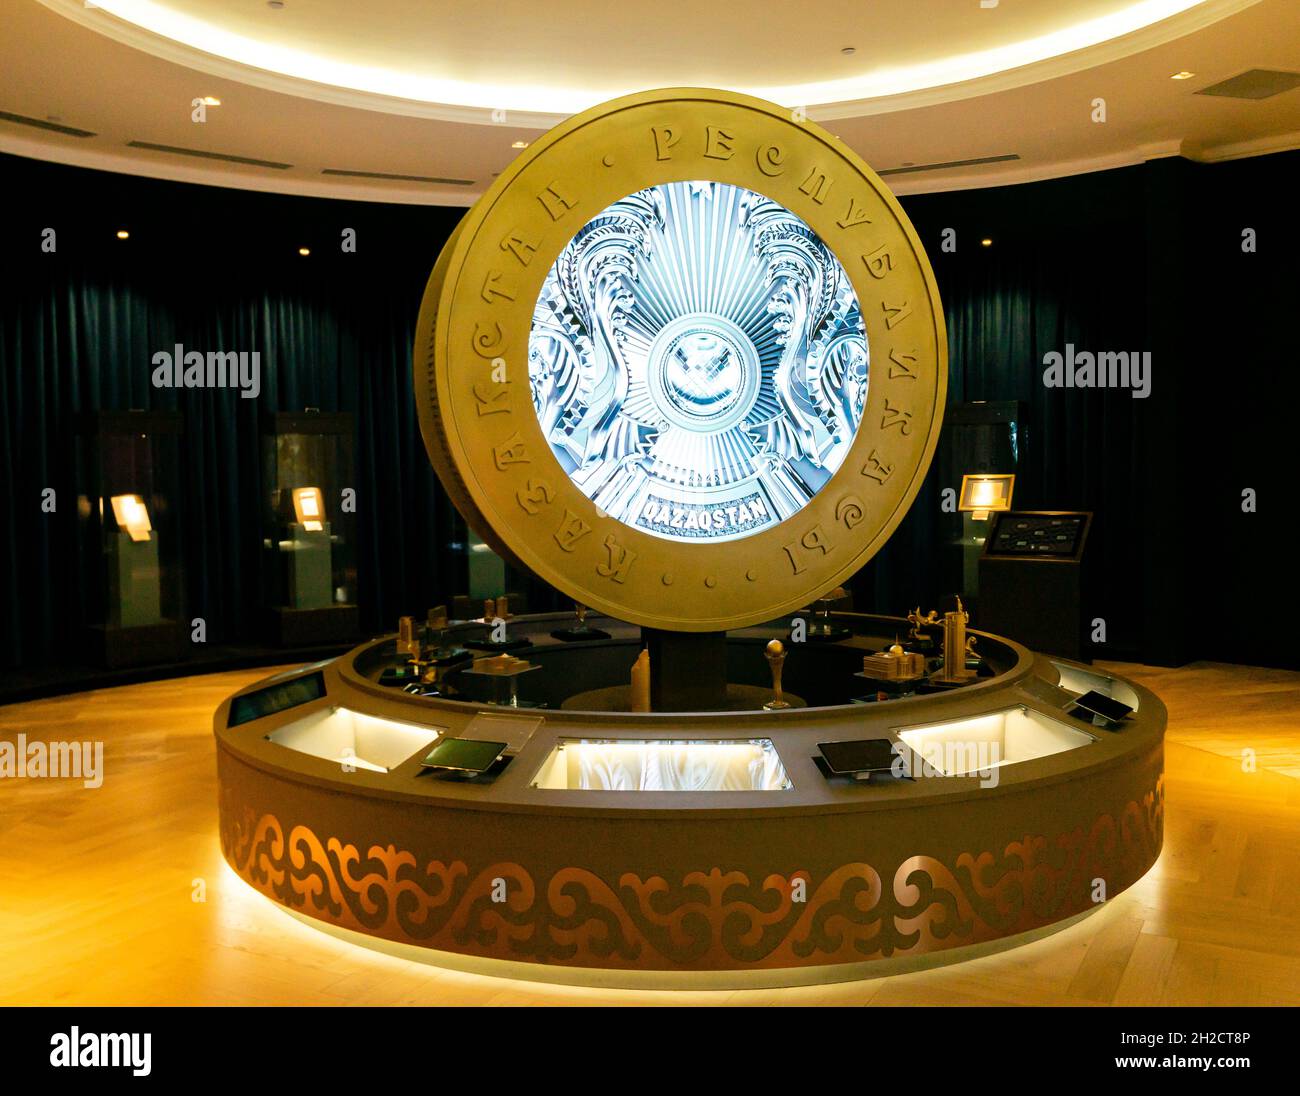 Big silvered rotating model of national emblem of Kazakhstan, on display in National Museum of Kazakhstan, Astana, Nur-Sultan, Kazakhstan Stock Photo